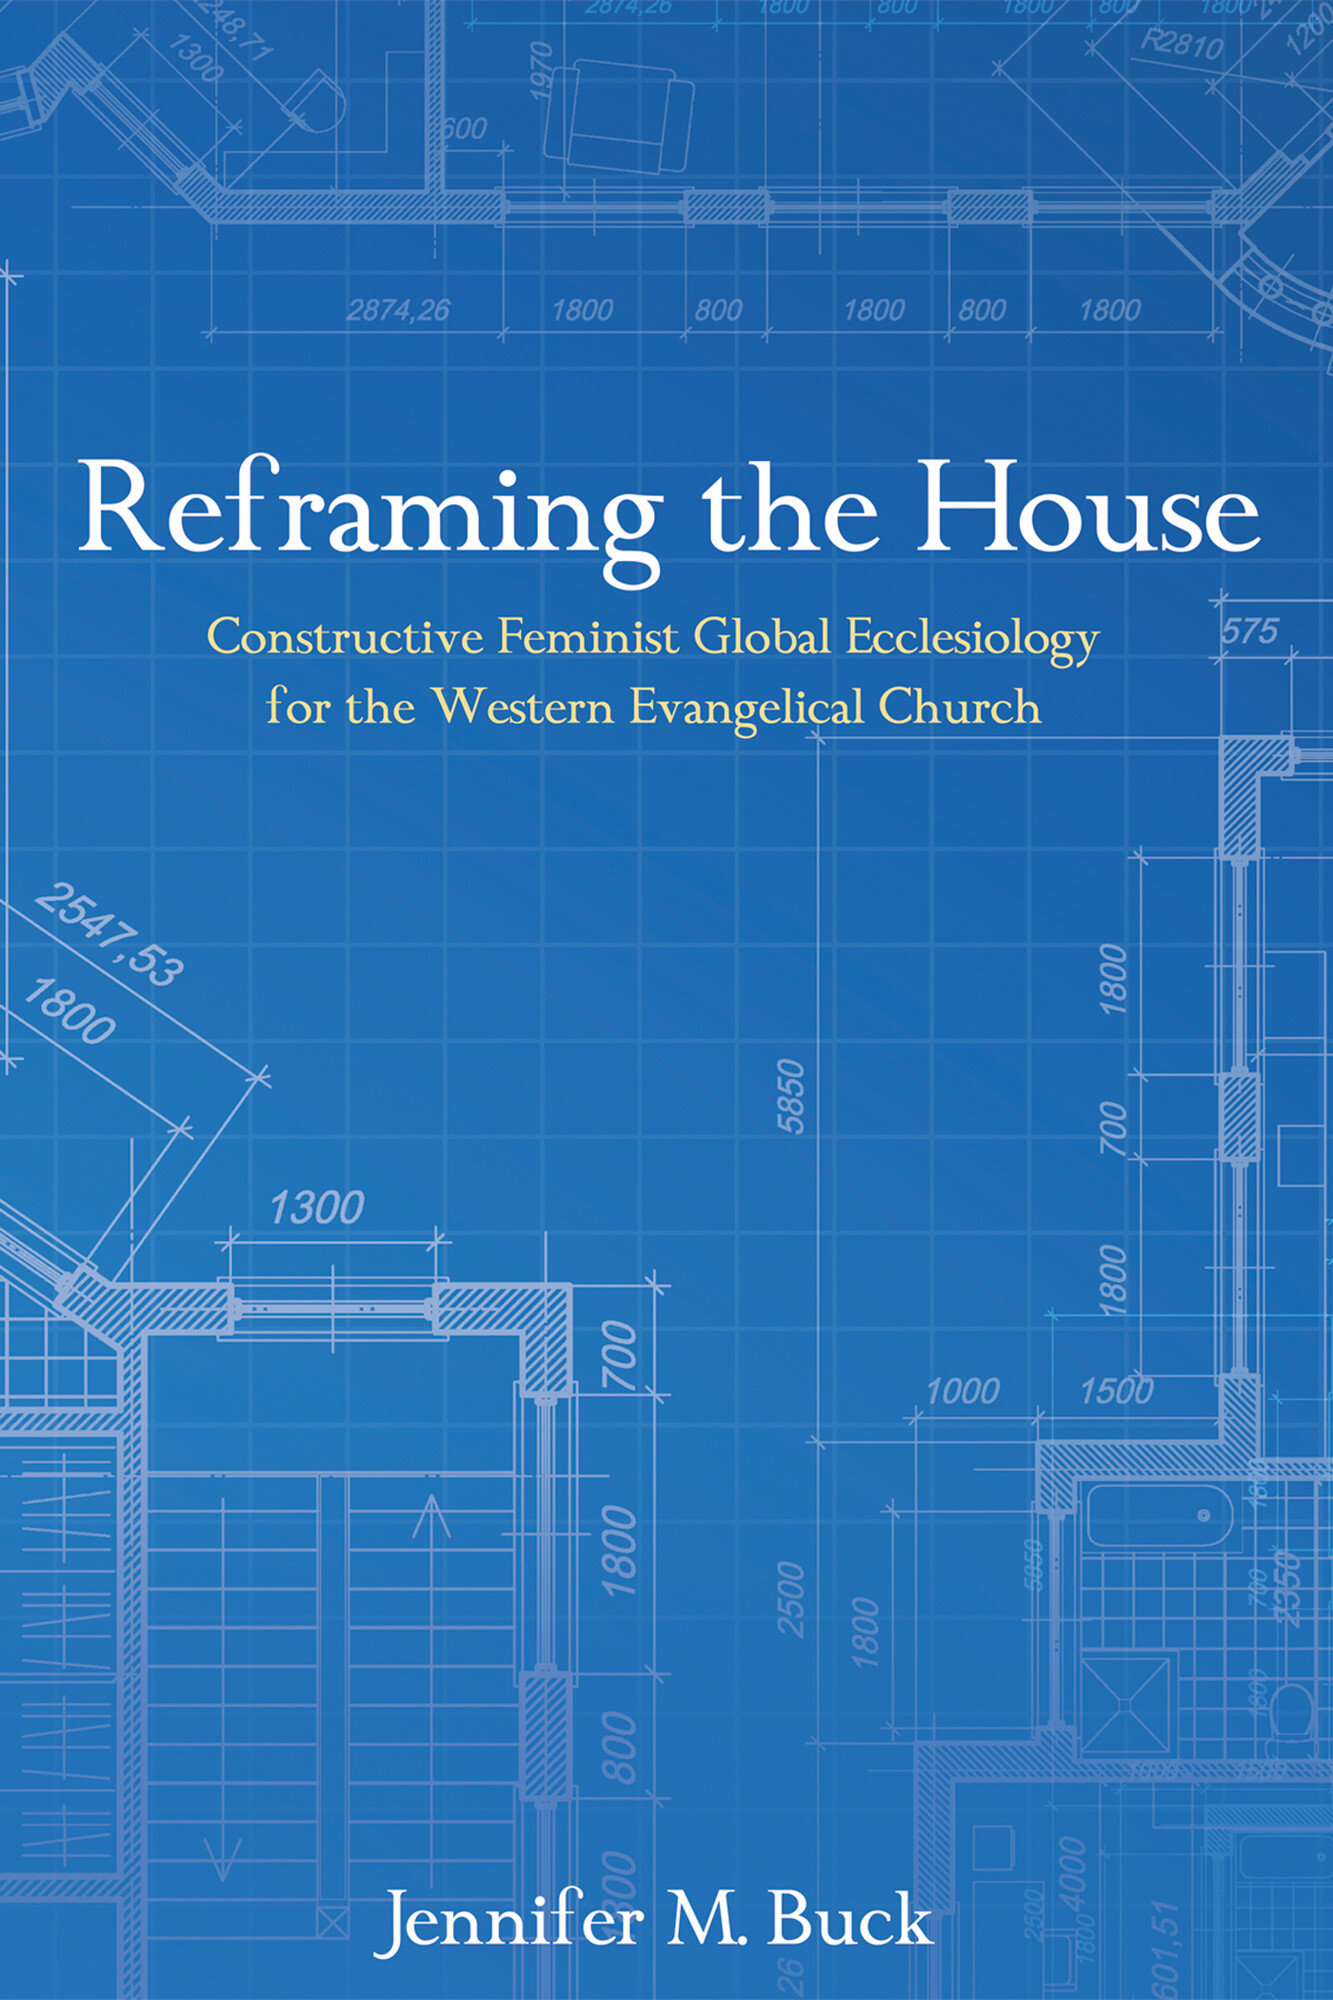 Reframing the House: Constructive Feminist Global Ecclesiology for the Western Evangelical Church